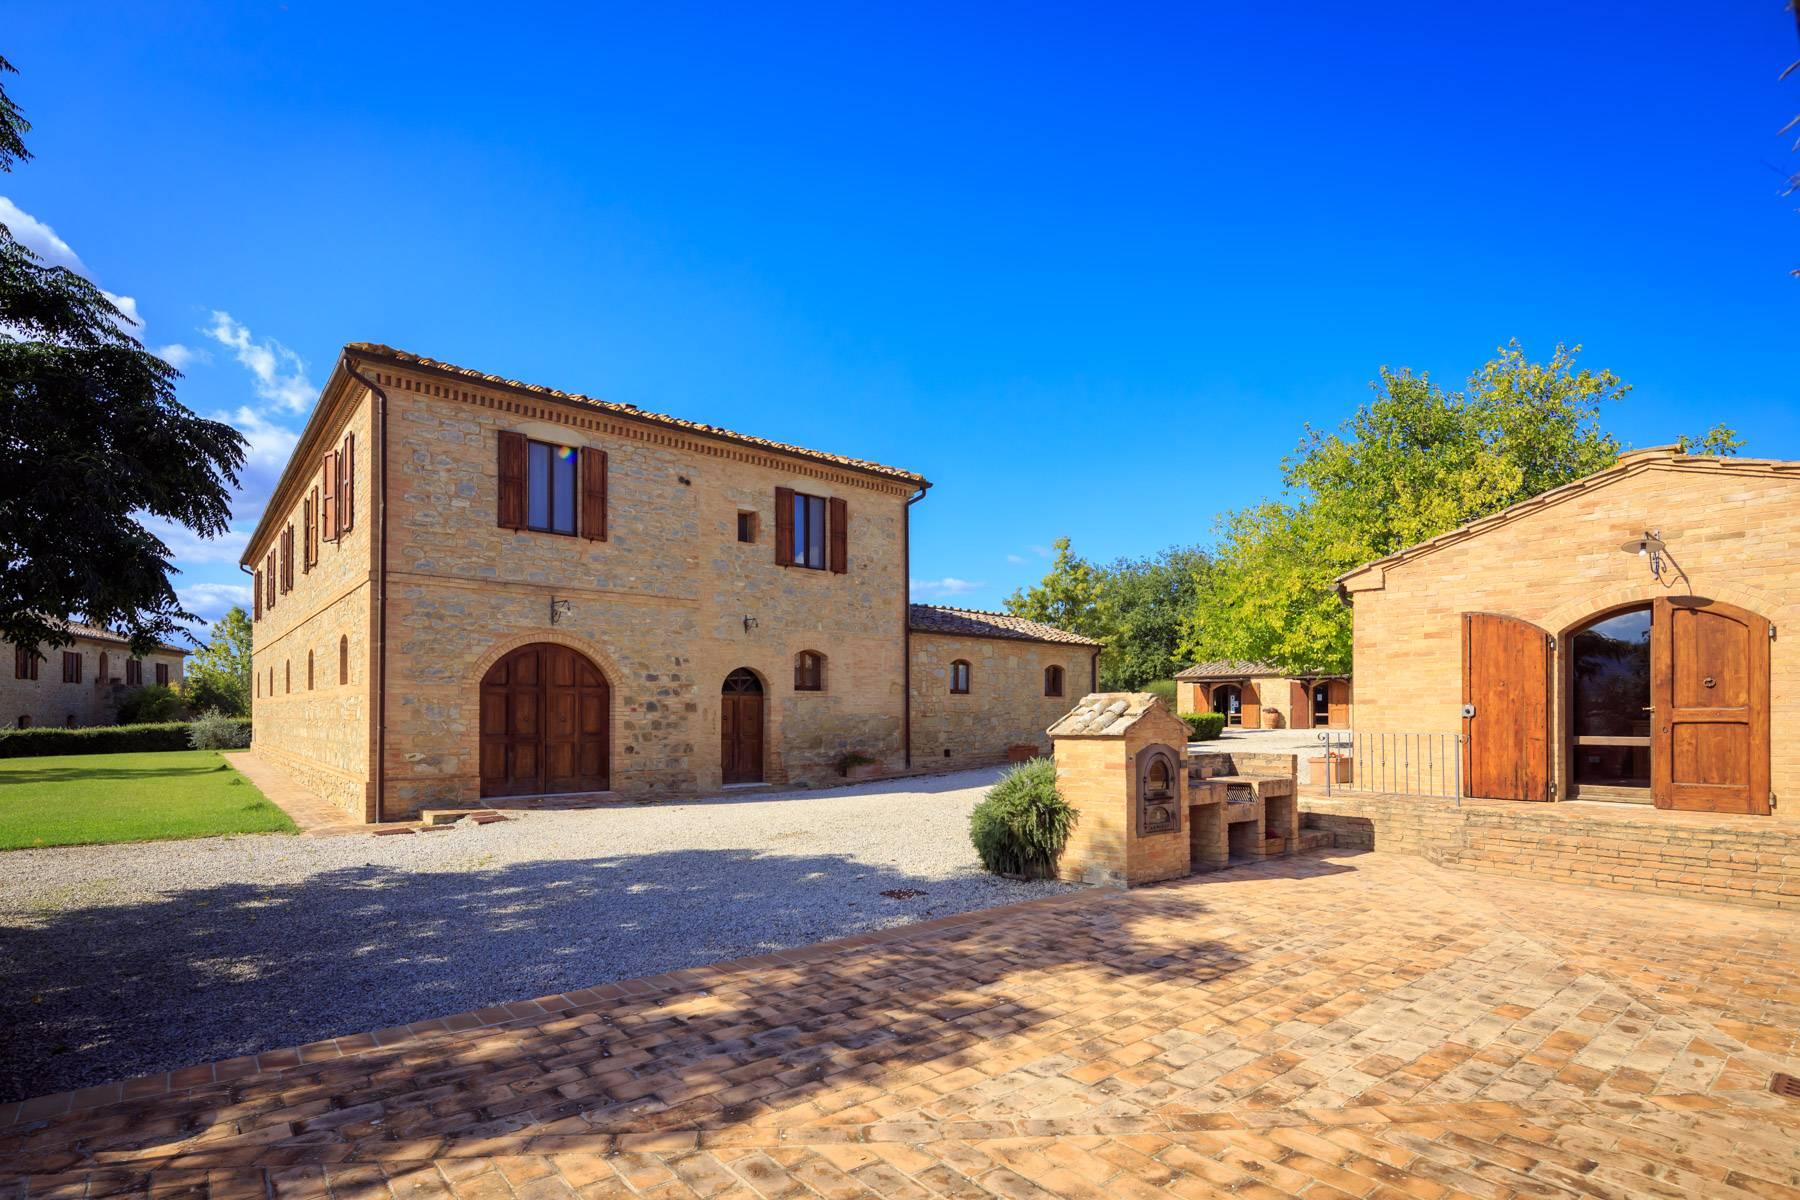 Exclusive property close to Siena - 6